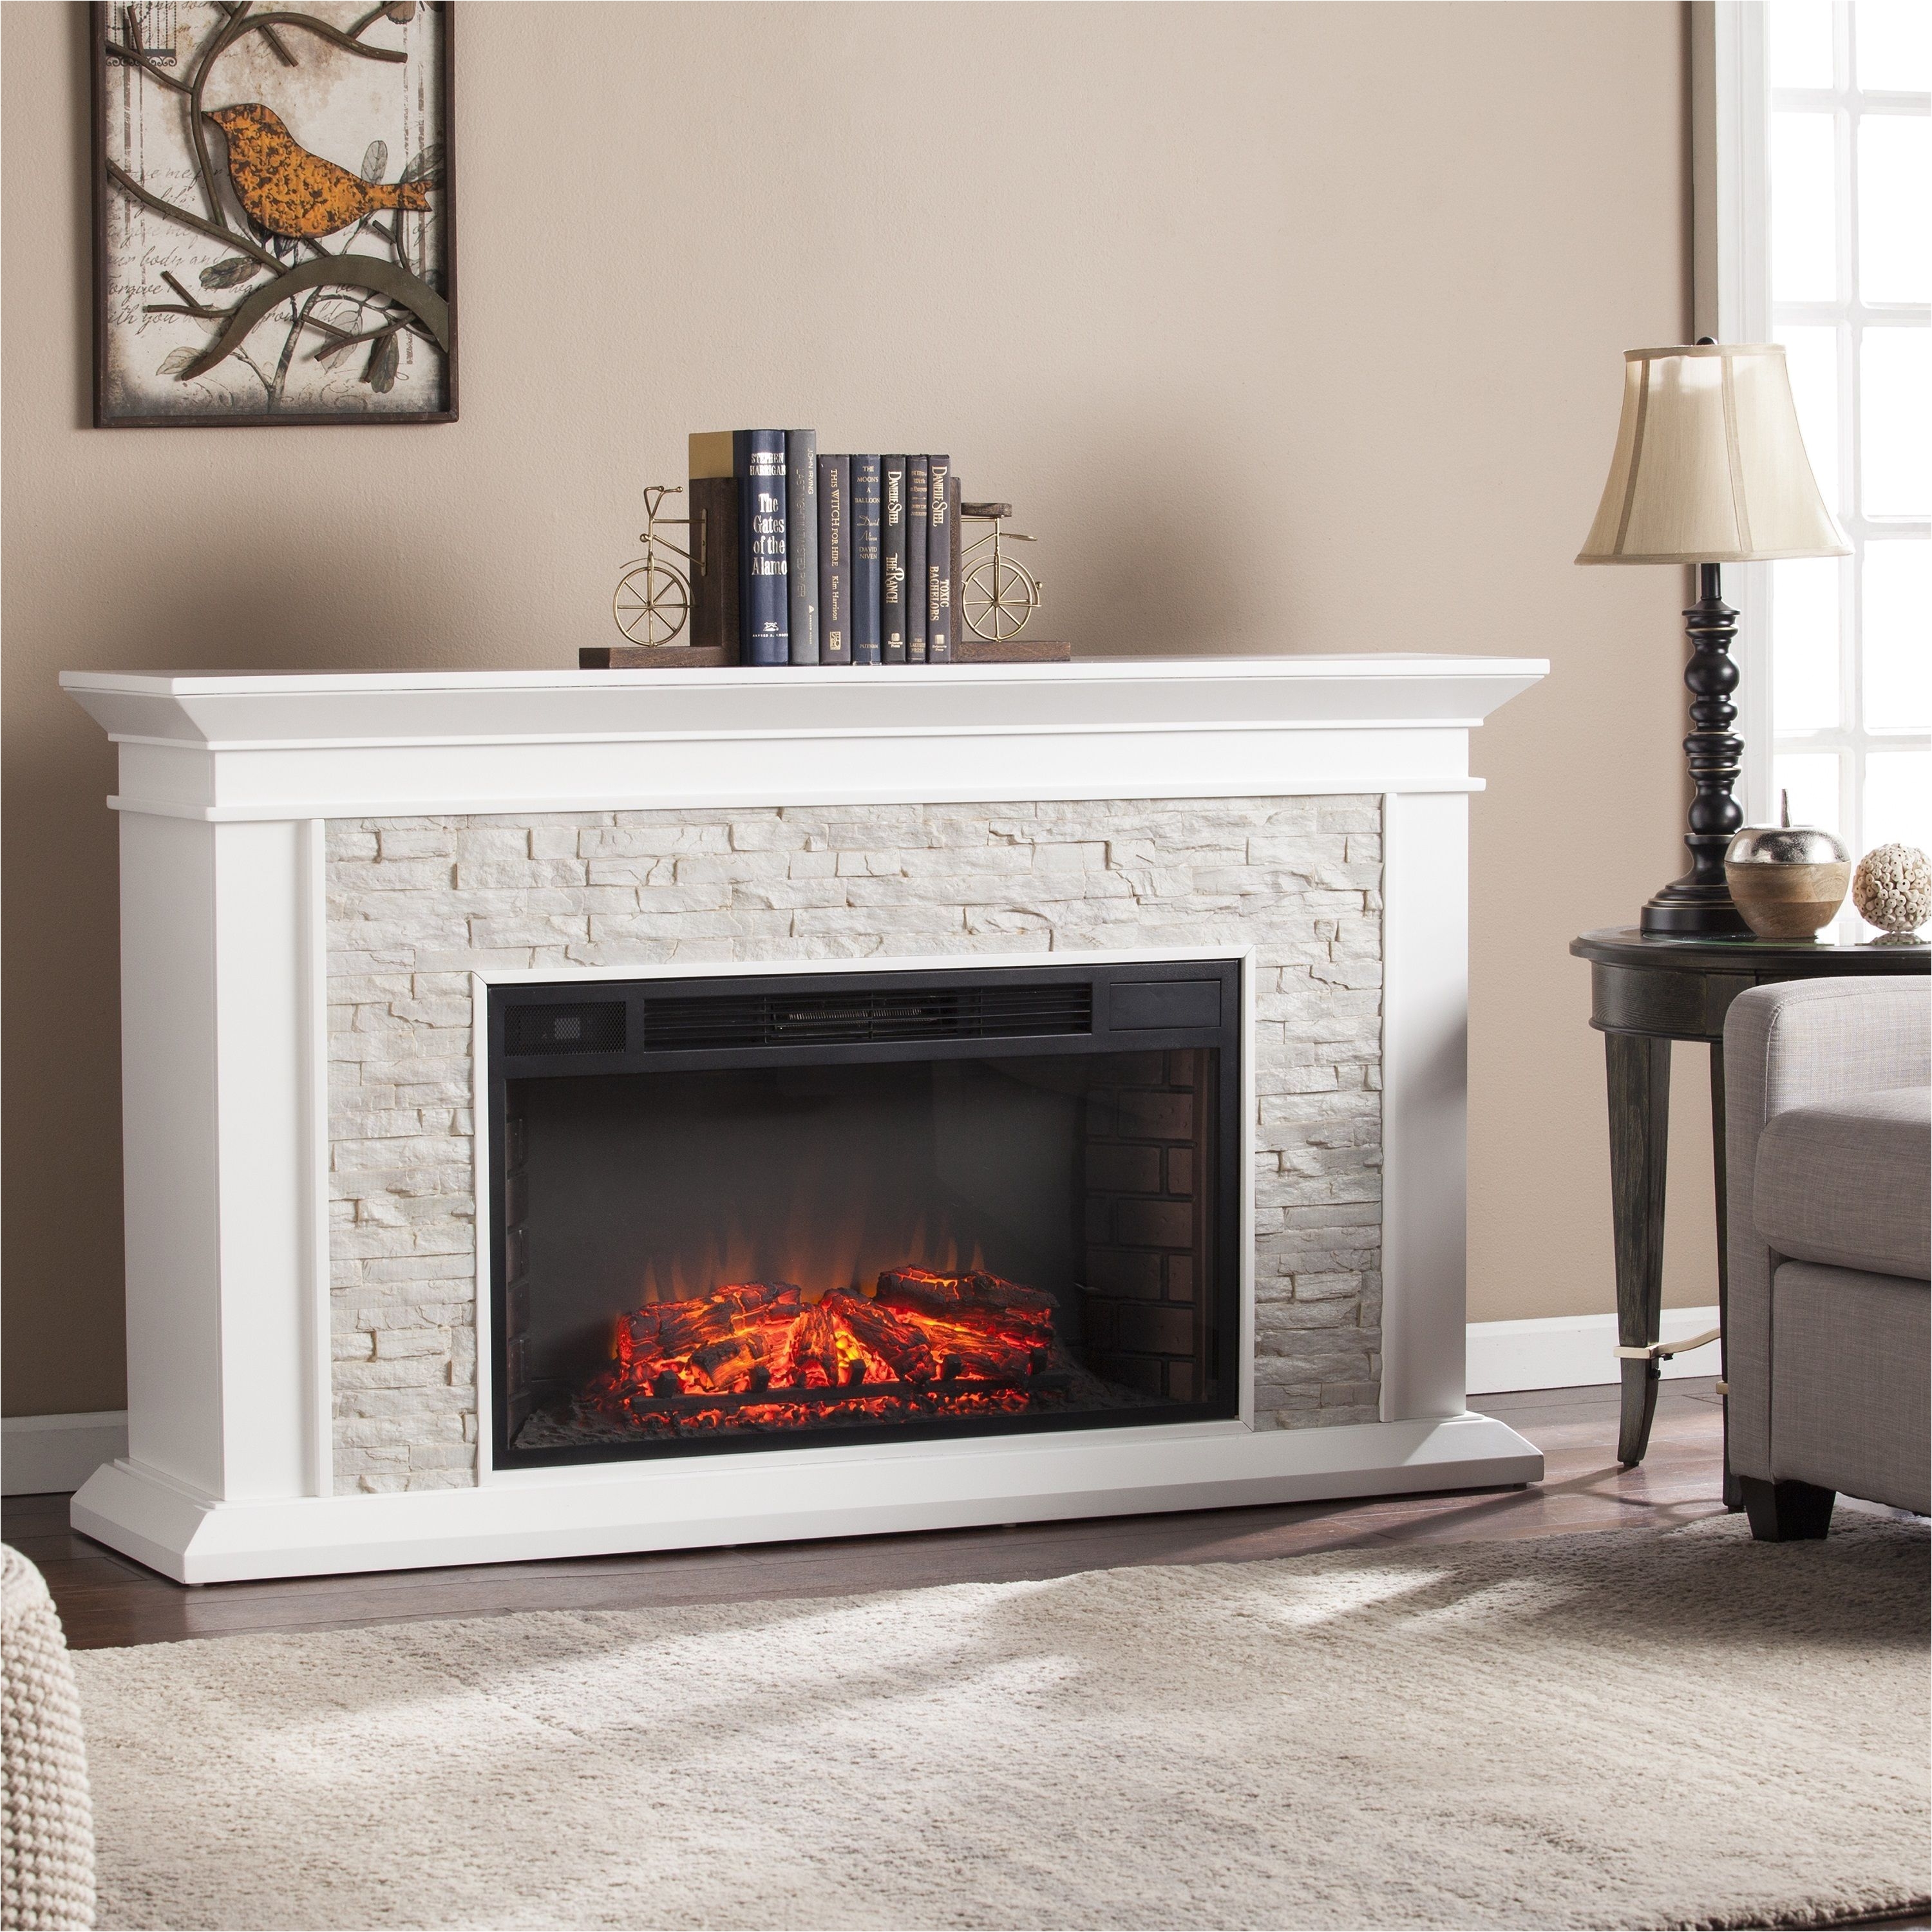 add a romantic touch to your dcor scene with this rustic inspired electric fireplace the